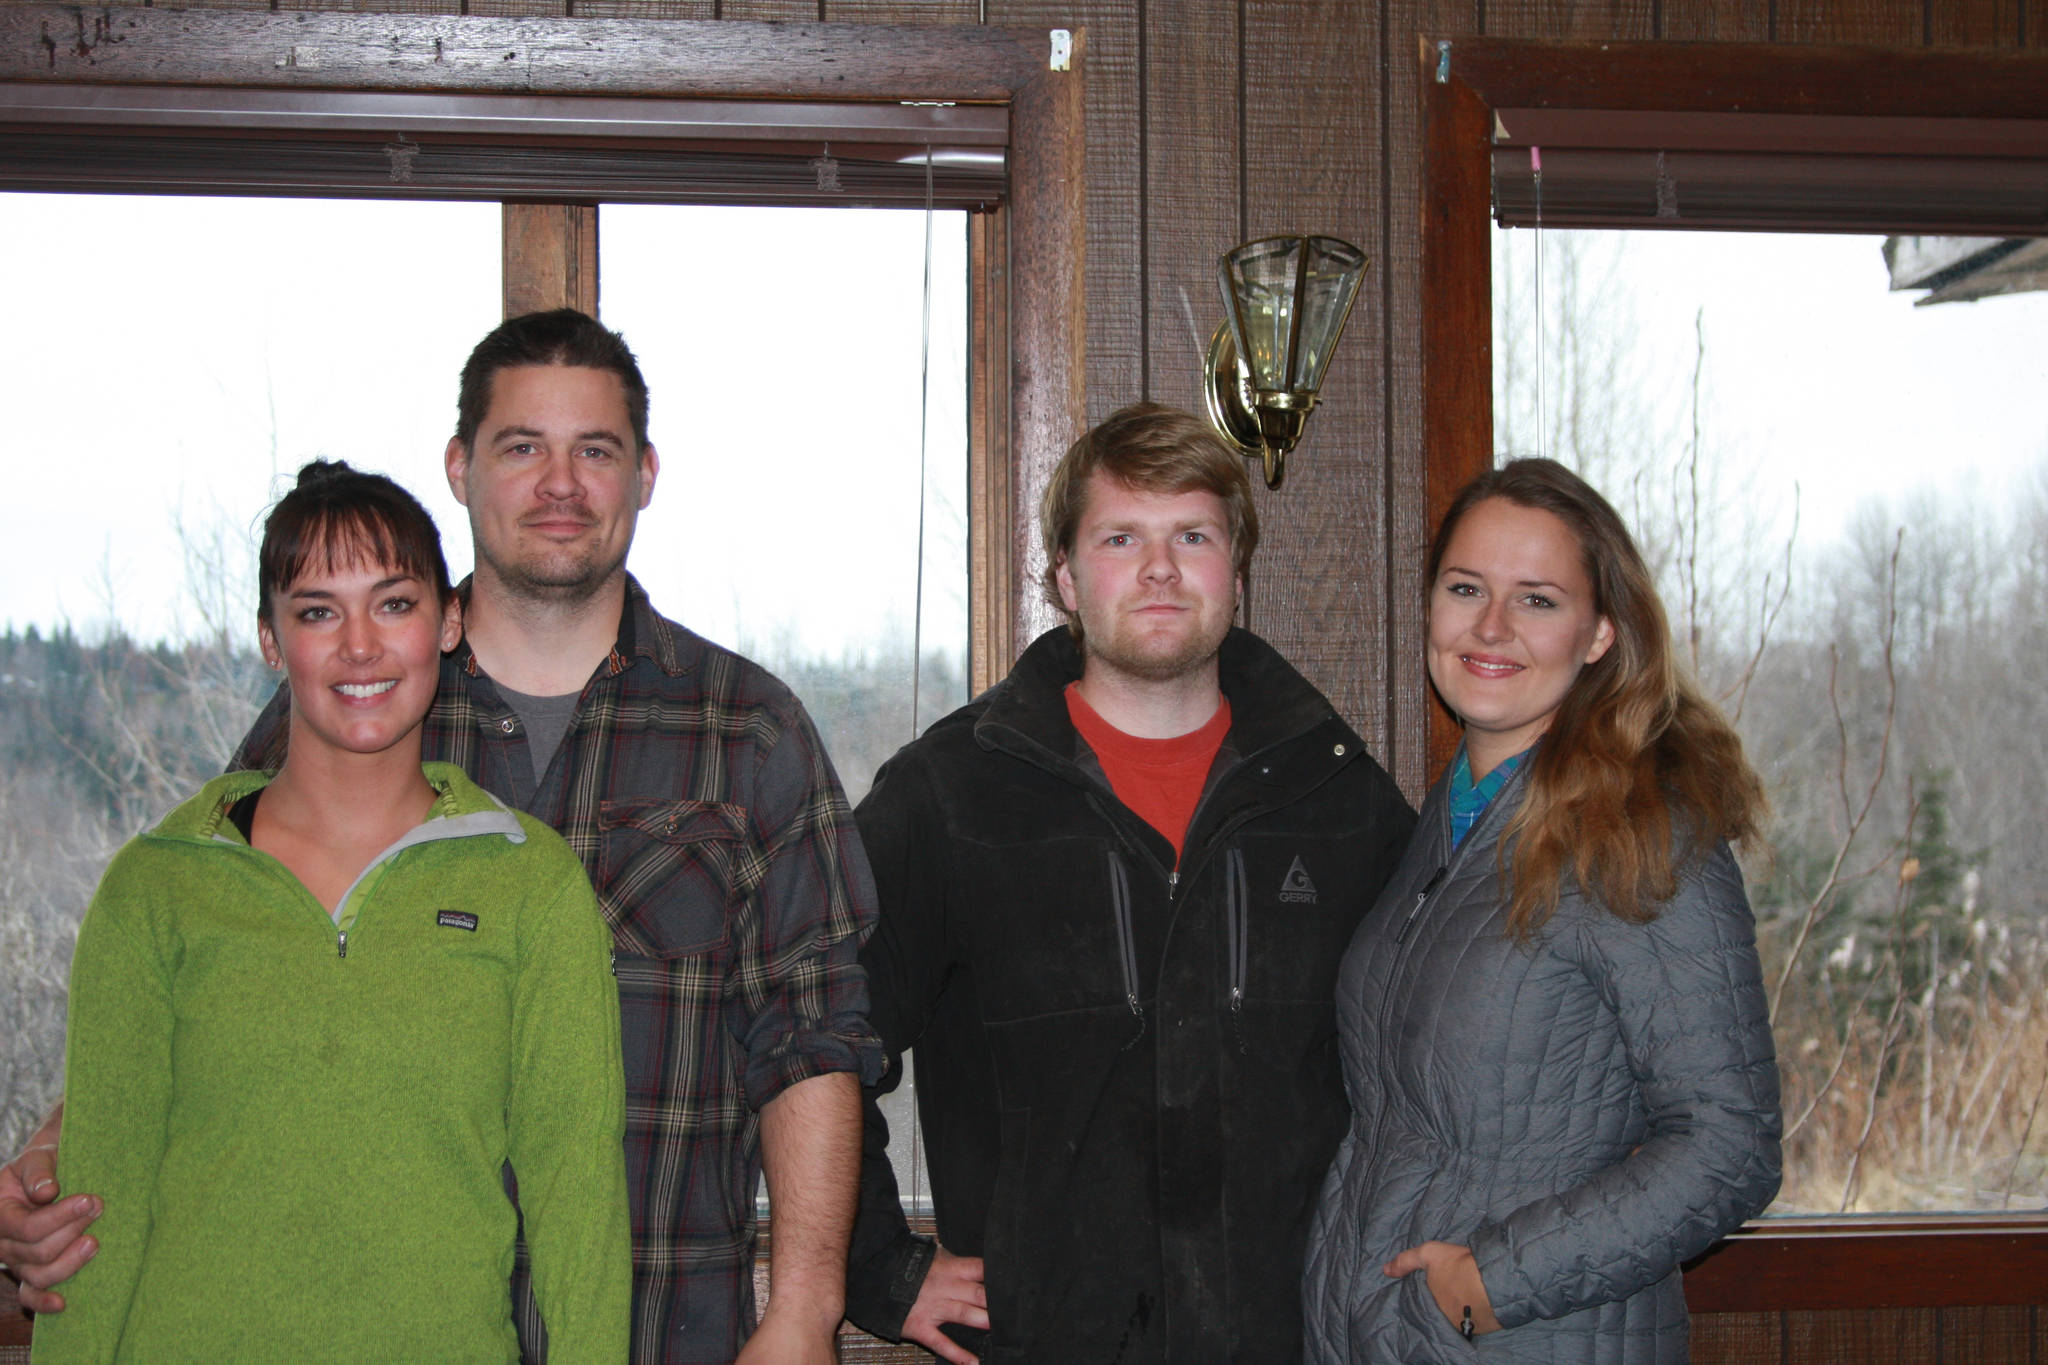 From left to right, new managers and upcoming owners Brittnay and Kyle Akee and Billy and Mamie Walker pose in the restaurant of the Anchor River Inn on Nov. 10, 2018 in Anchor Point, Alaska. (Photo by Delcenia Cosman)